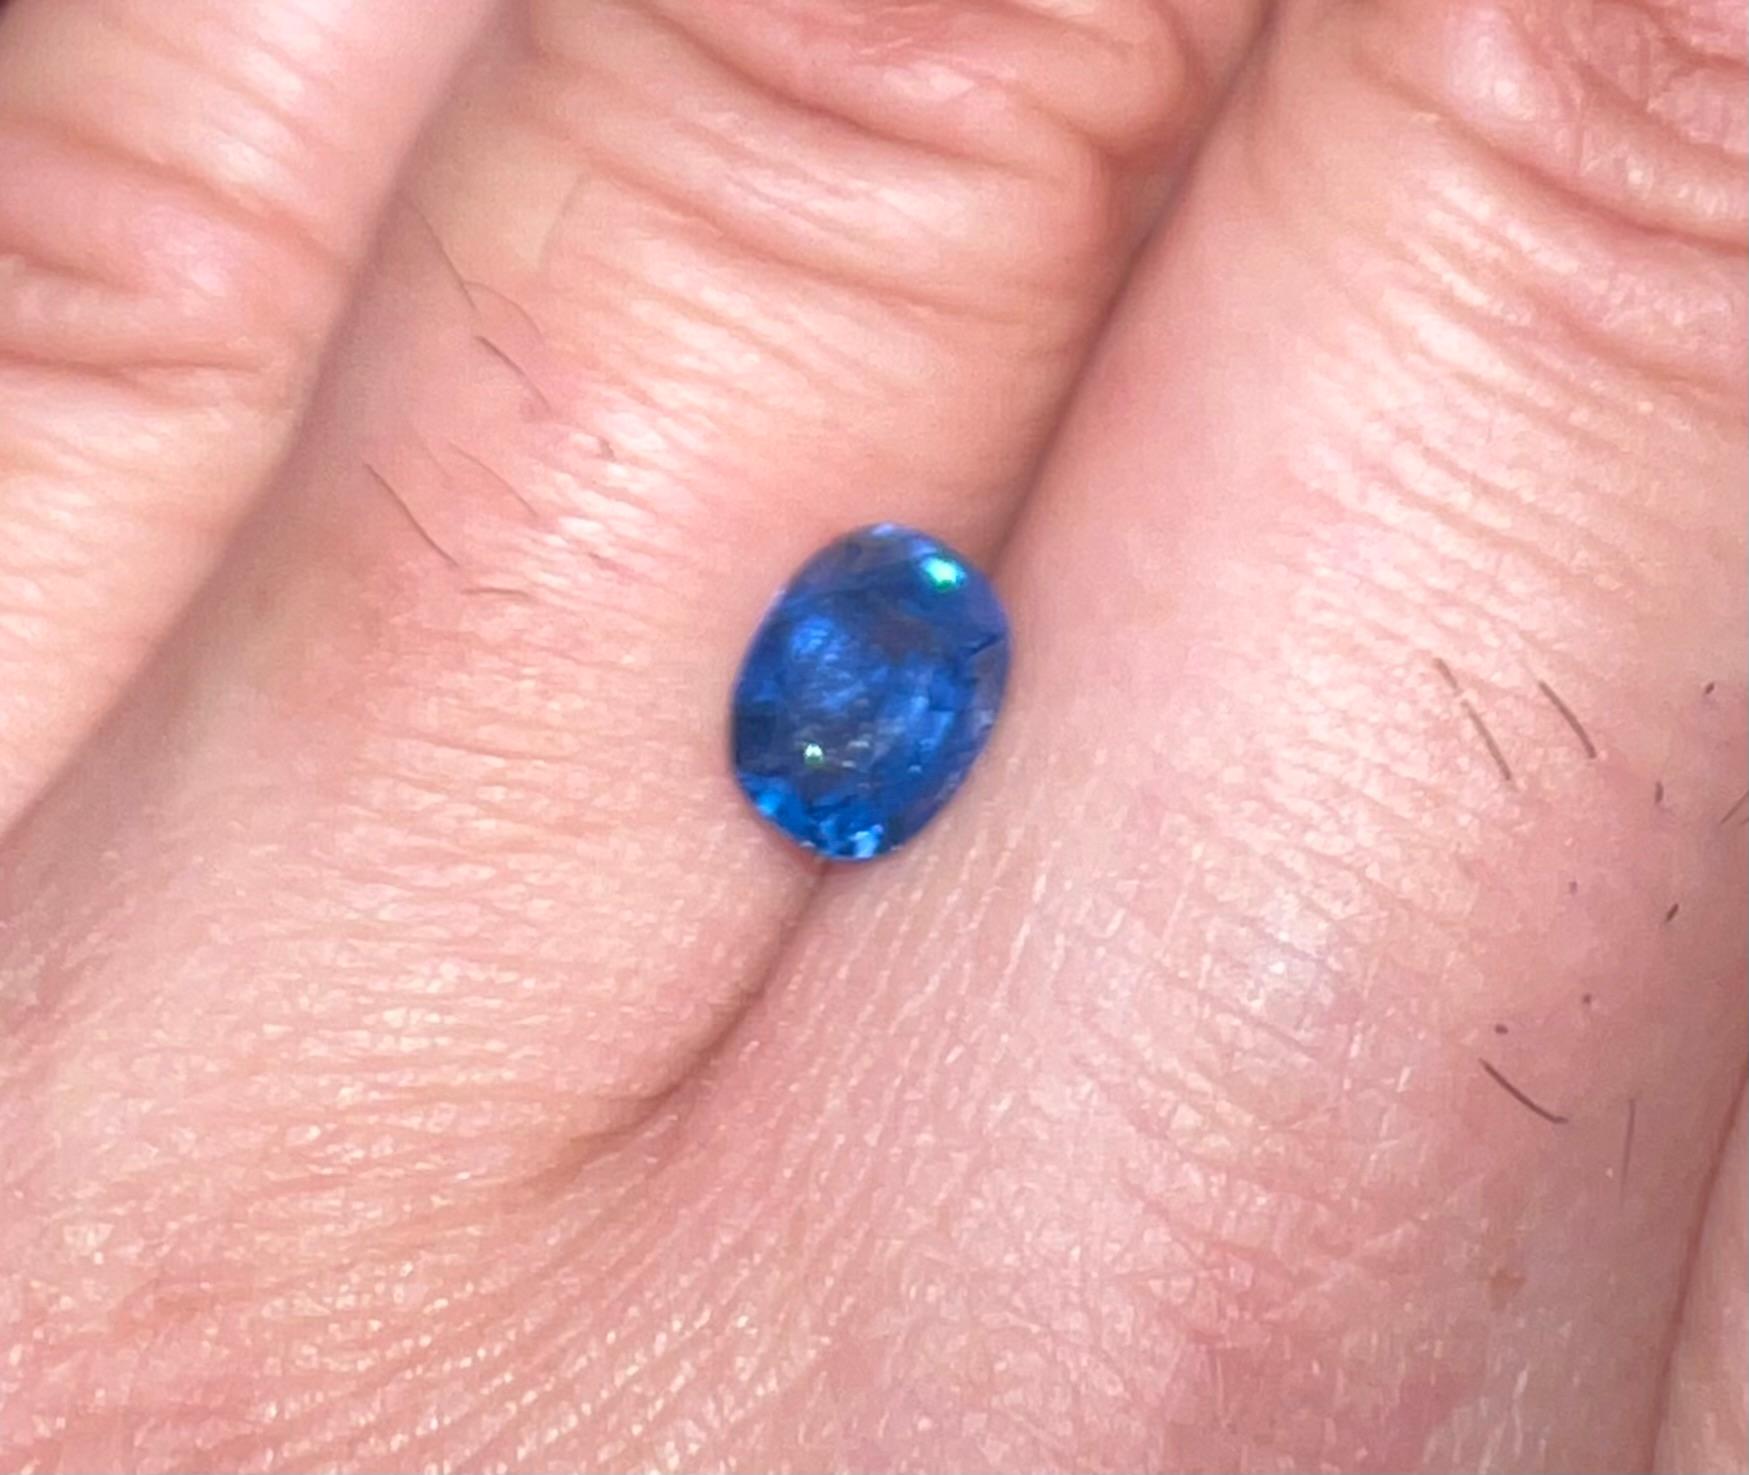 
This beautiful royal neon blue Cobalt Spinel is one of the rare beauties I was able to luckily obtain at the cobalt Spinel mine in Luc Yen Vietnam recently. It is exceptionally rare to obtain Cobalt Spinel above a half a carat and this beauty is